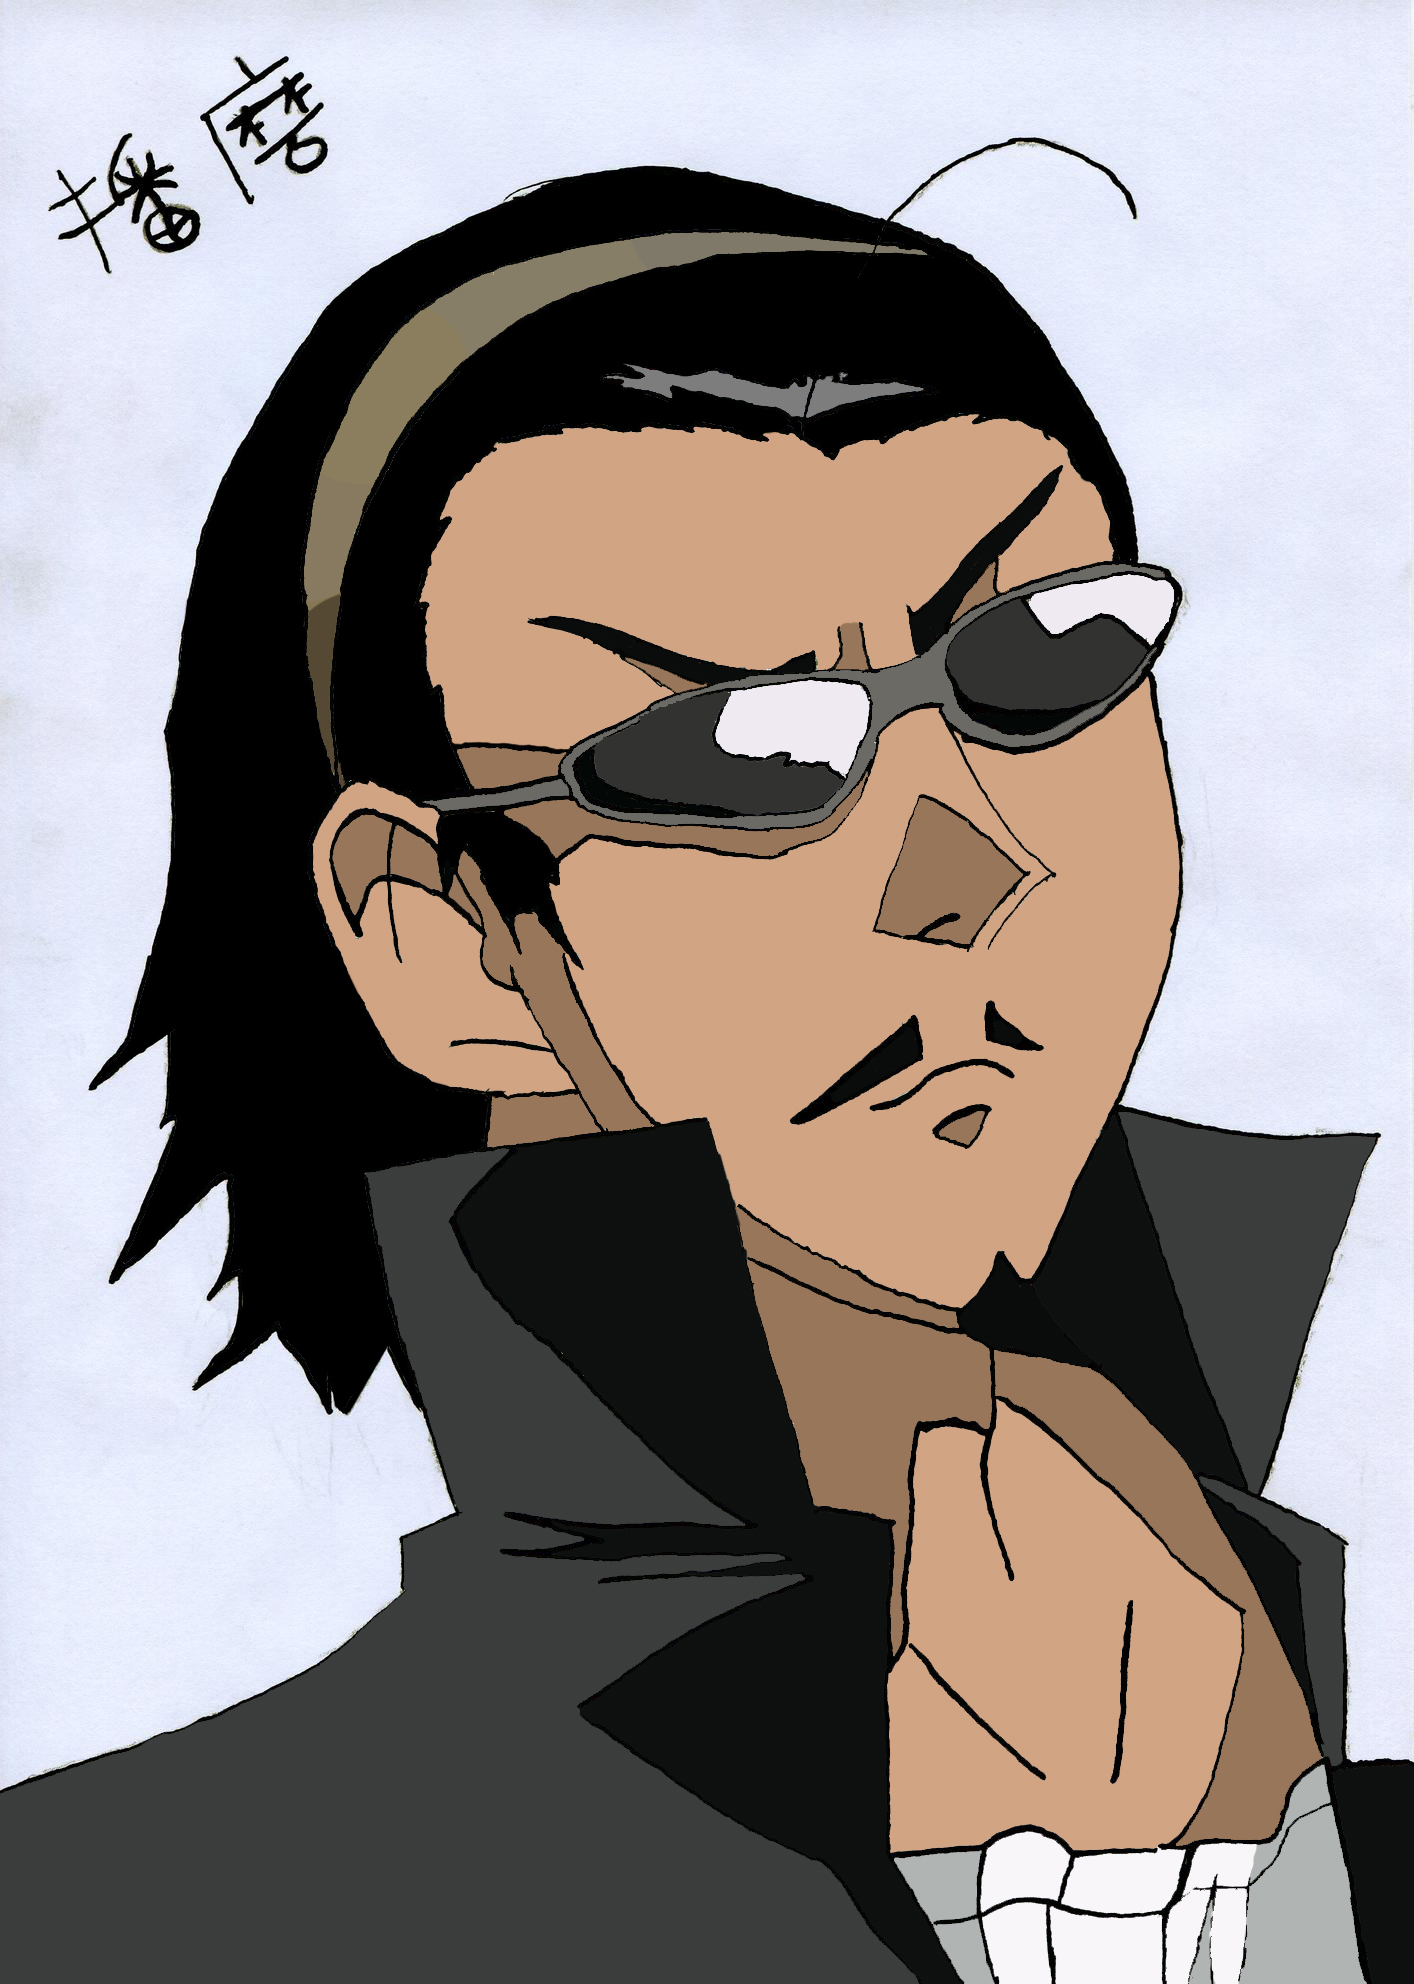 Harima From School Rumble

Scanned Ink drawing :3

Now coloured Digital